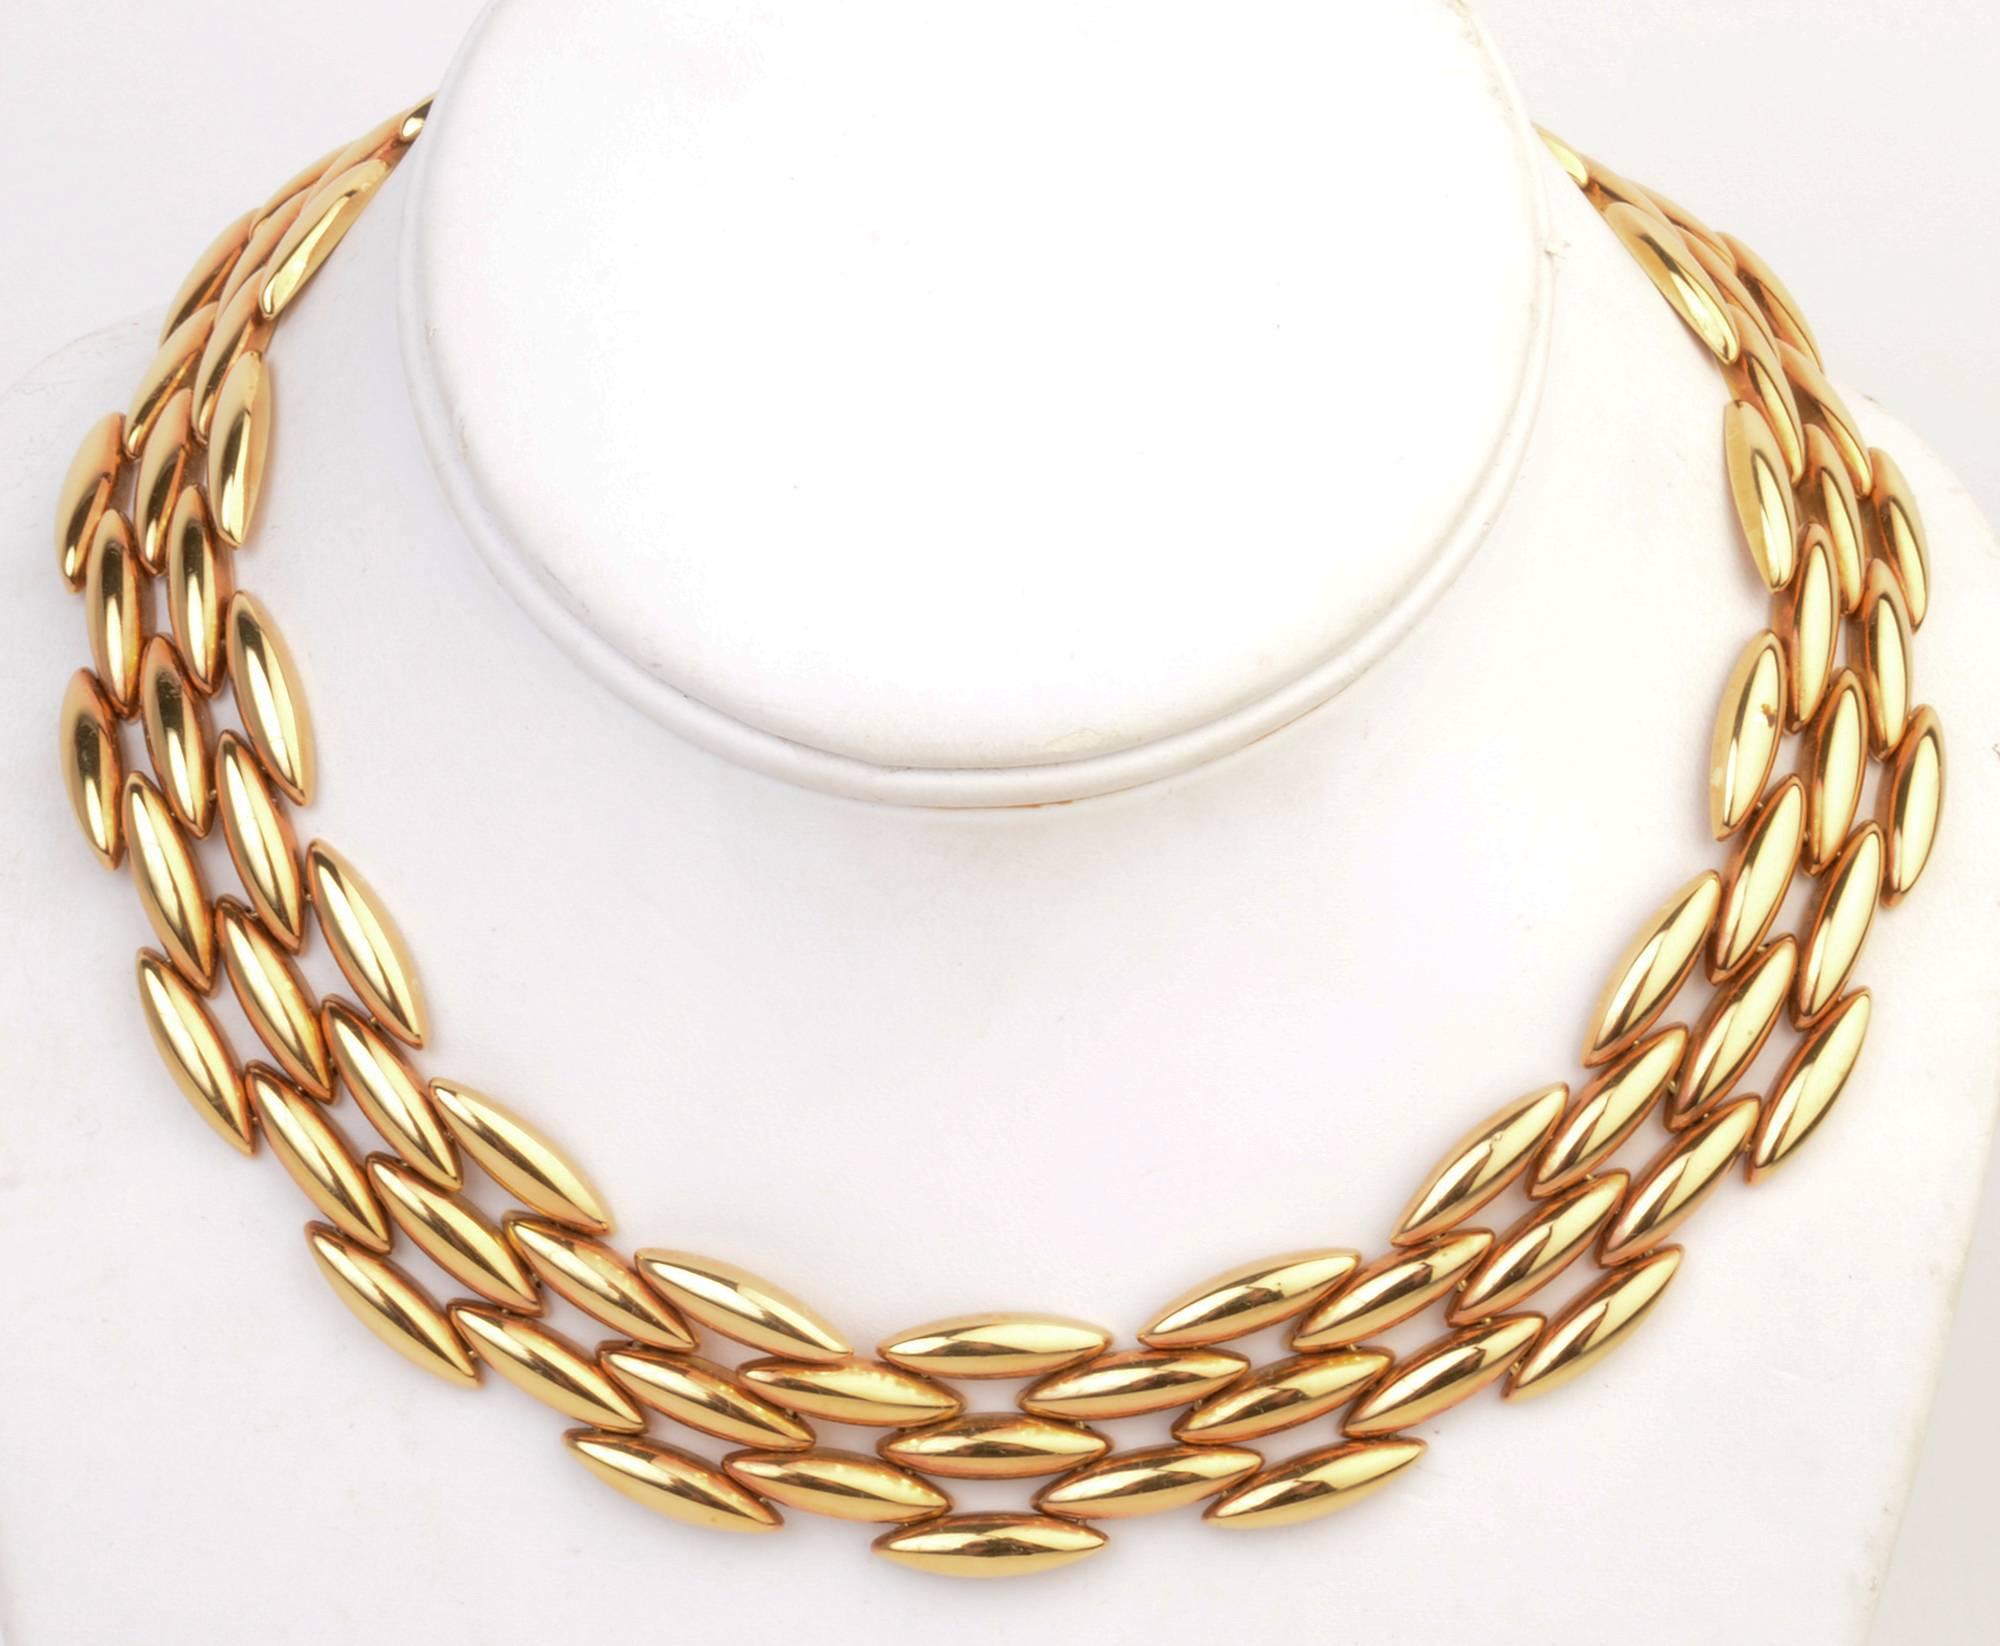 Classic Cartier navette shaped link necklace in eighteen karat gold. The necklace is 16 inches long and 3/4 " wide. A matching bracelet is available as item  LU1333250493.